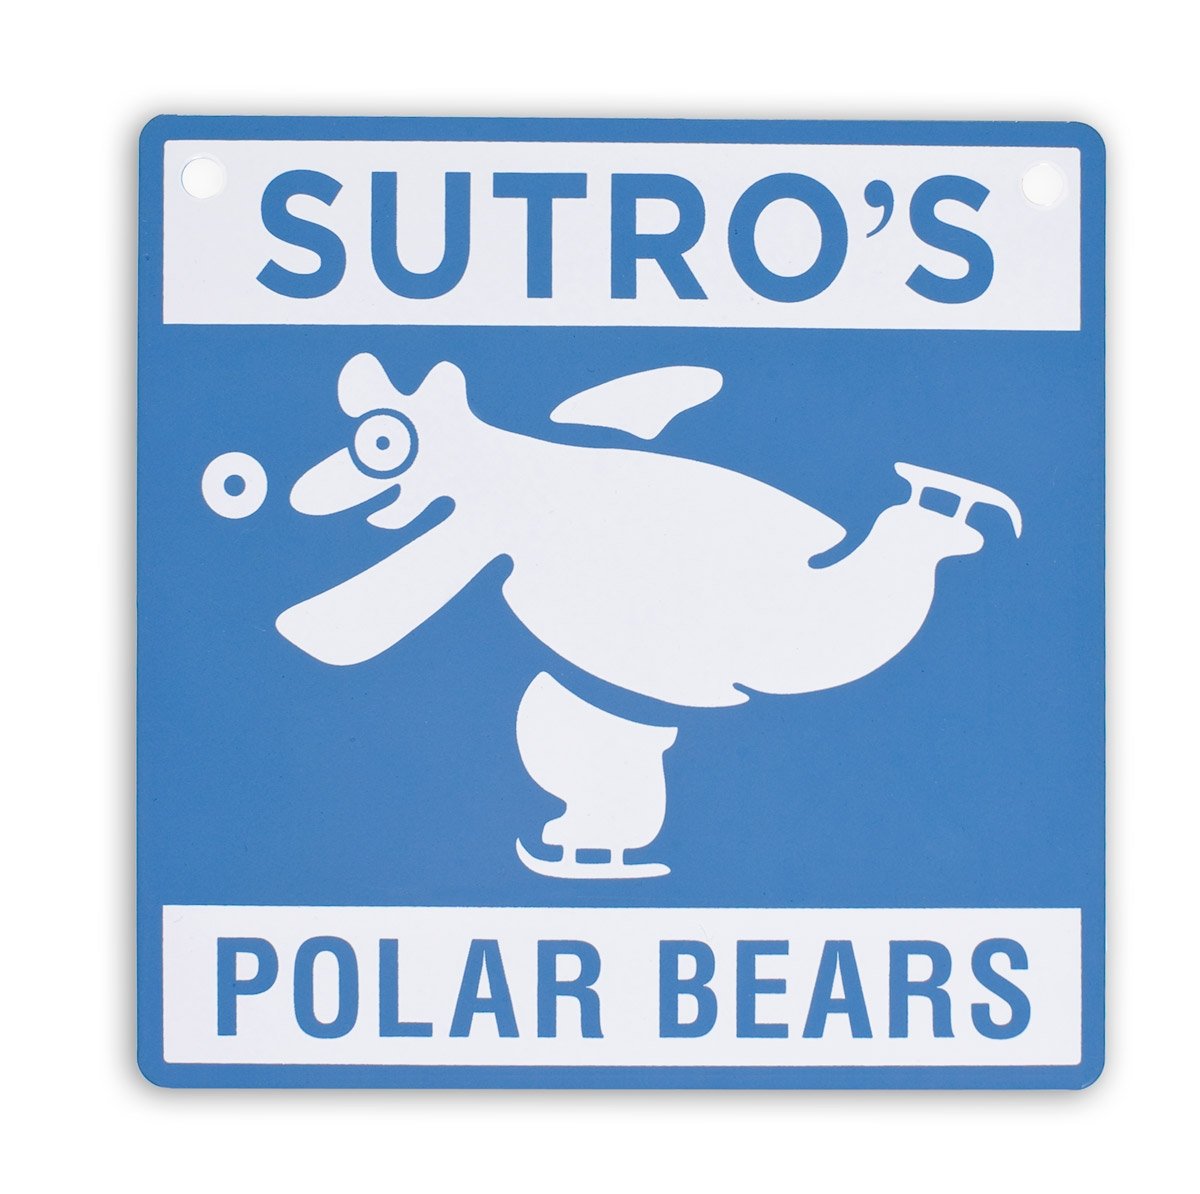 Blue and white Sutro's Polar Bears decorative metal sign, featuring vintage image of ice-skating polar bear.